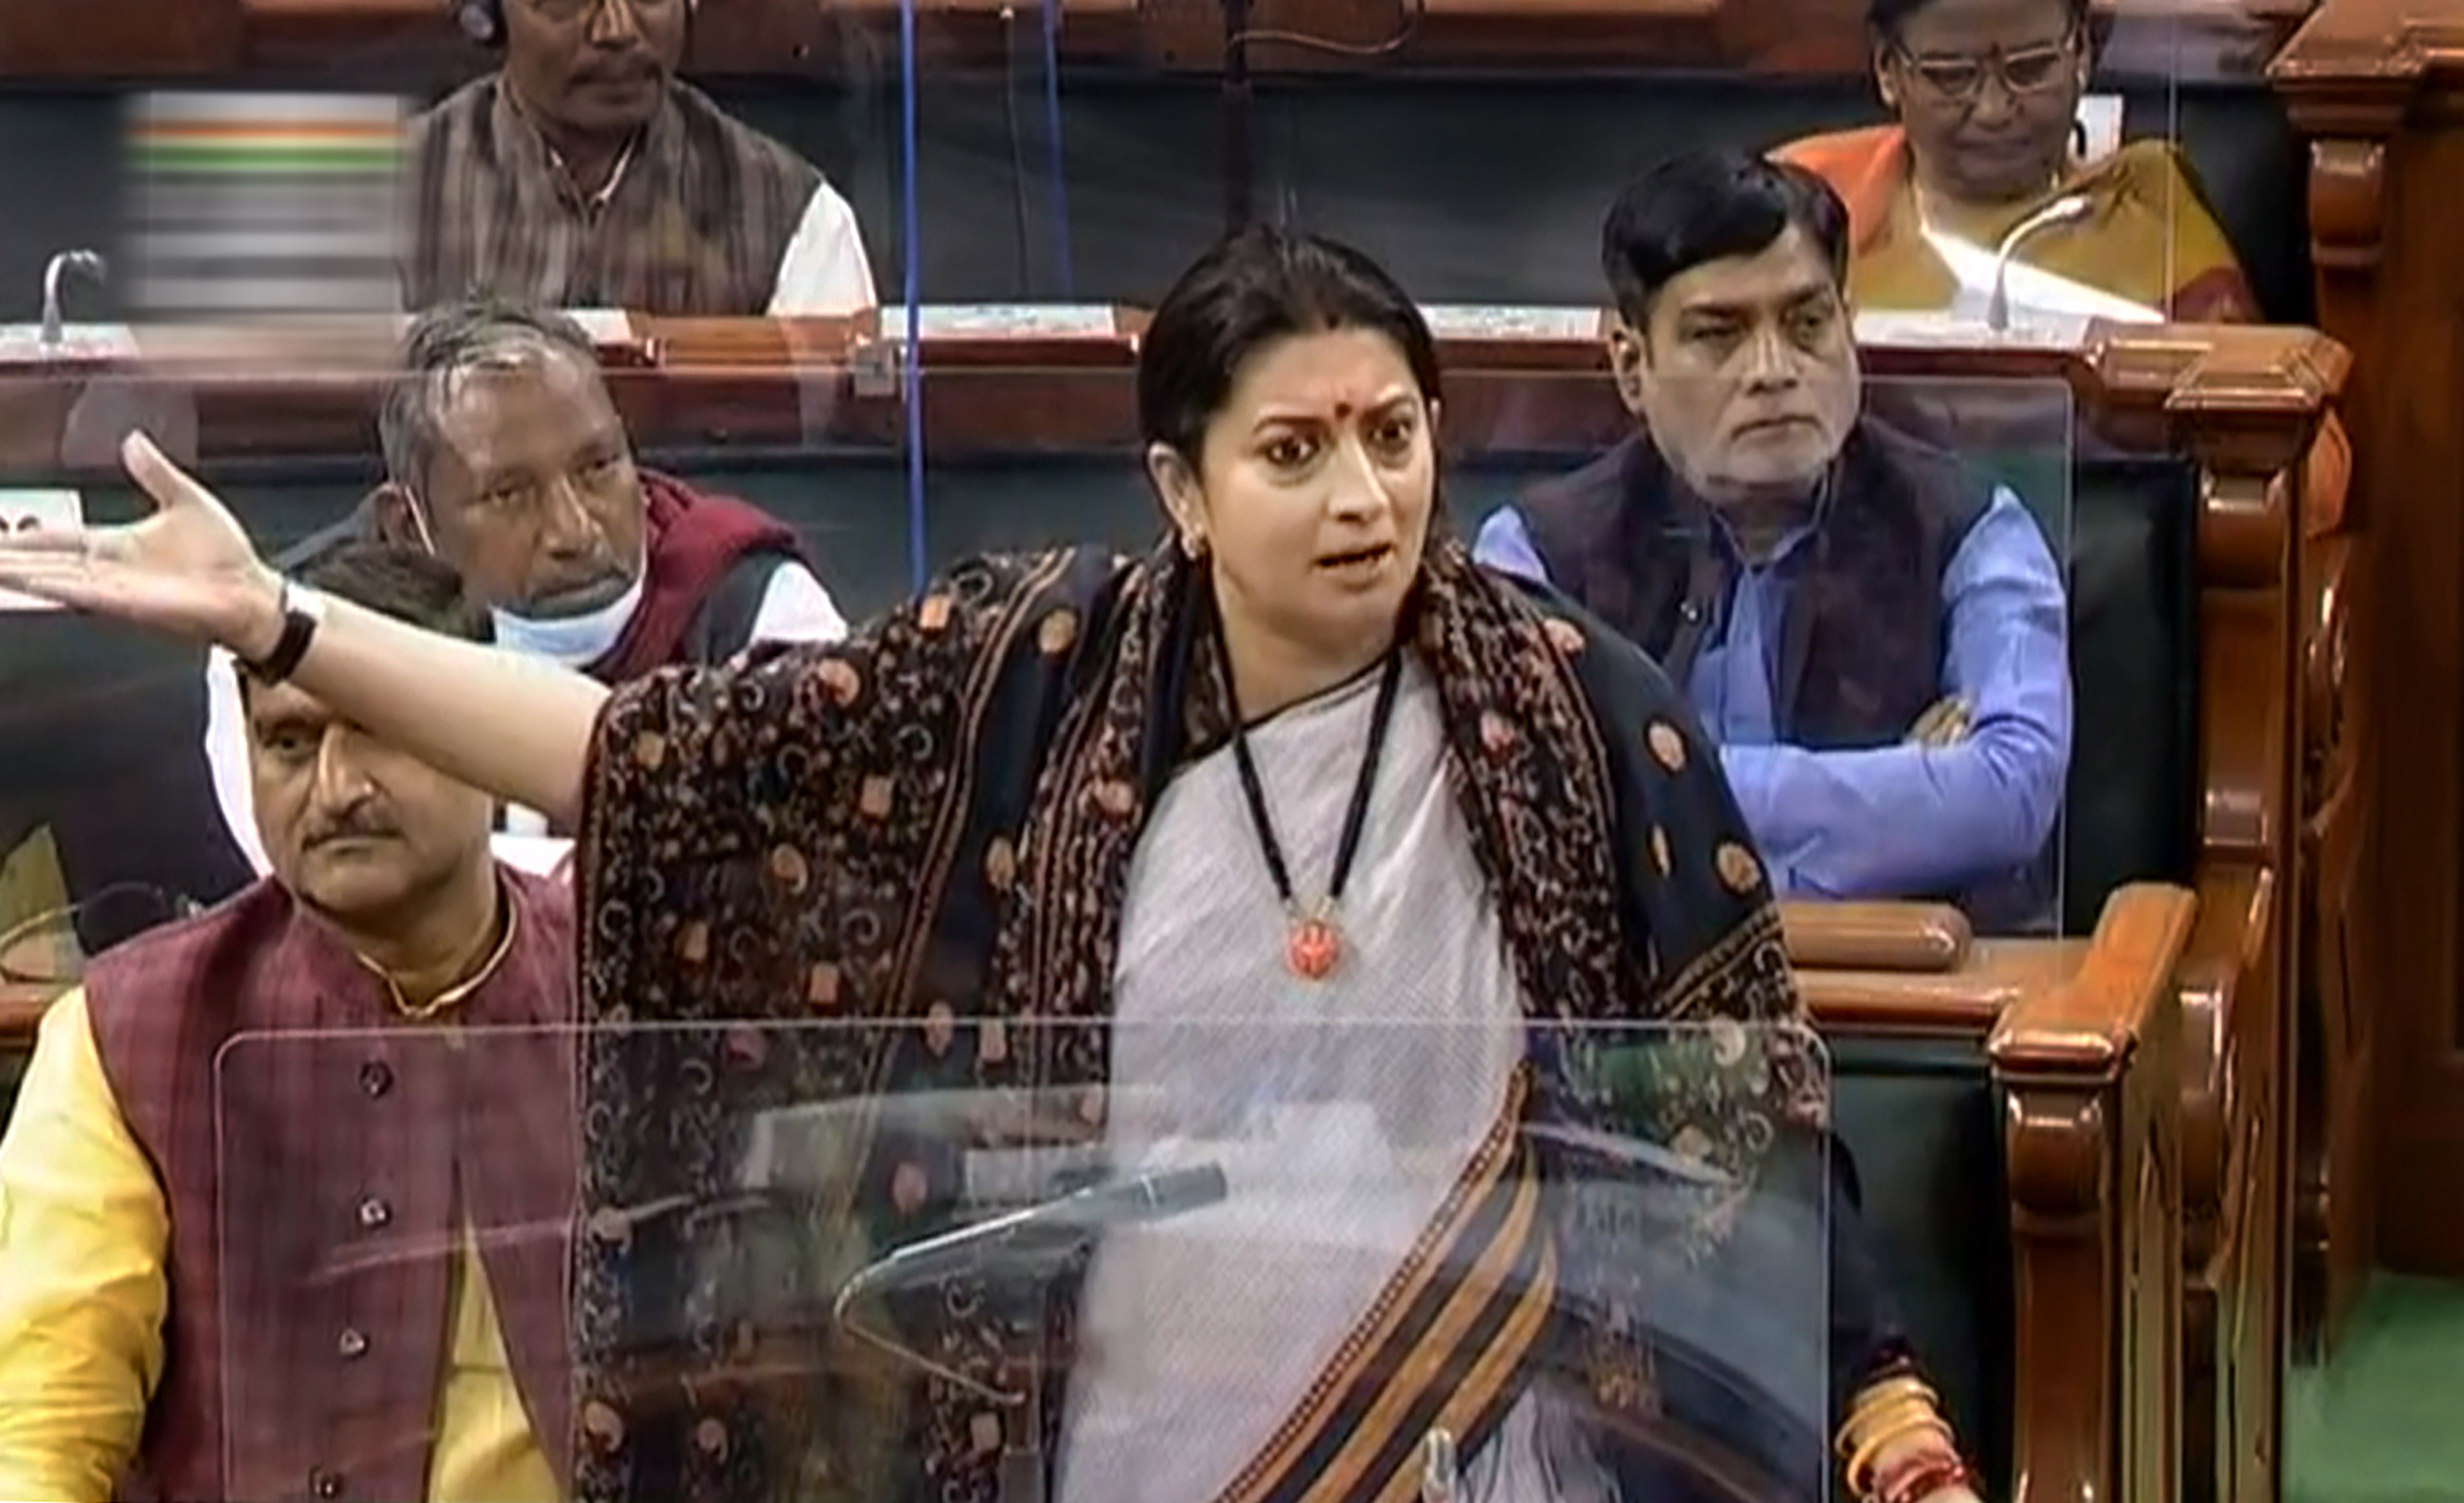 Union Minister Smriti Irani speaks in the Lok Sabha during the ongoing Budget Session of Parliament, in New Delhi, Thursday, Feb. 11, 2021. Credit: LSTV Video screengrab